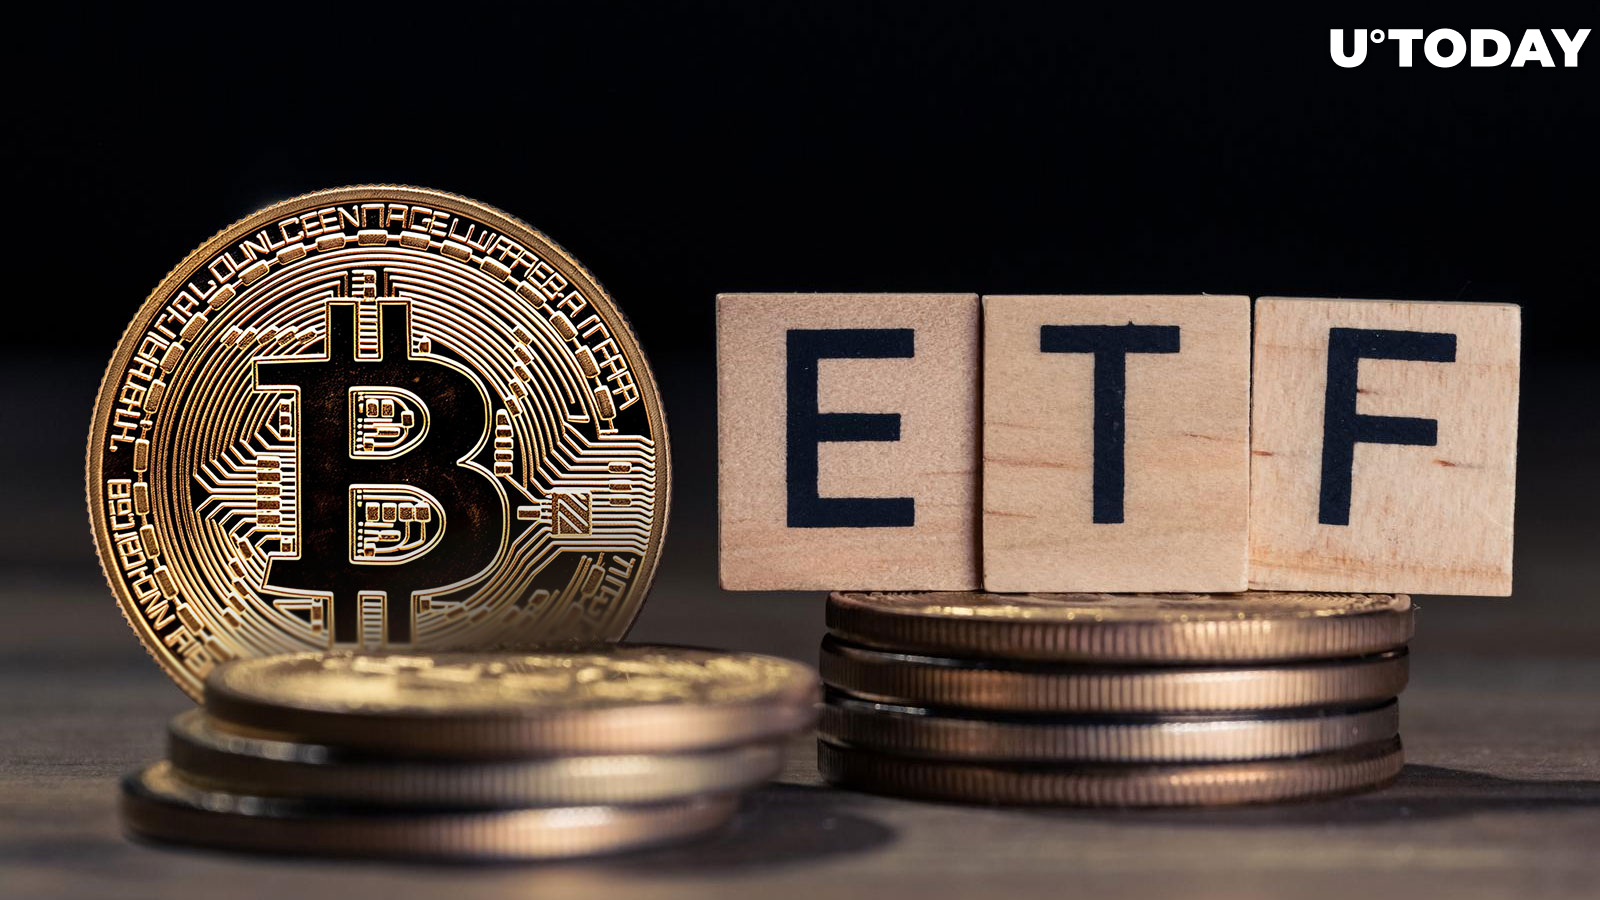 Bitcoin (BTC) Price Set to Hit $50,000, Matrixport Points to ETF Approvals and Institutional Interest